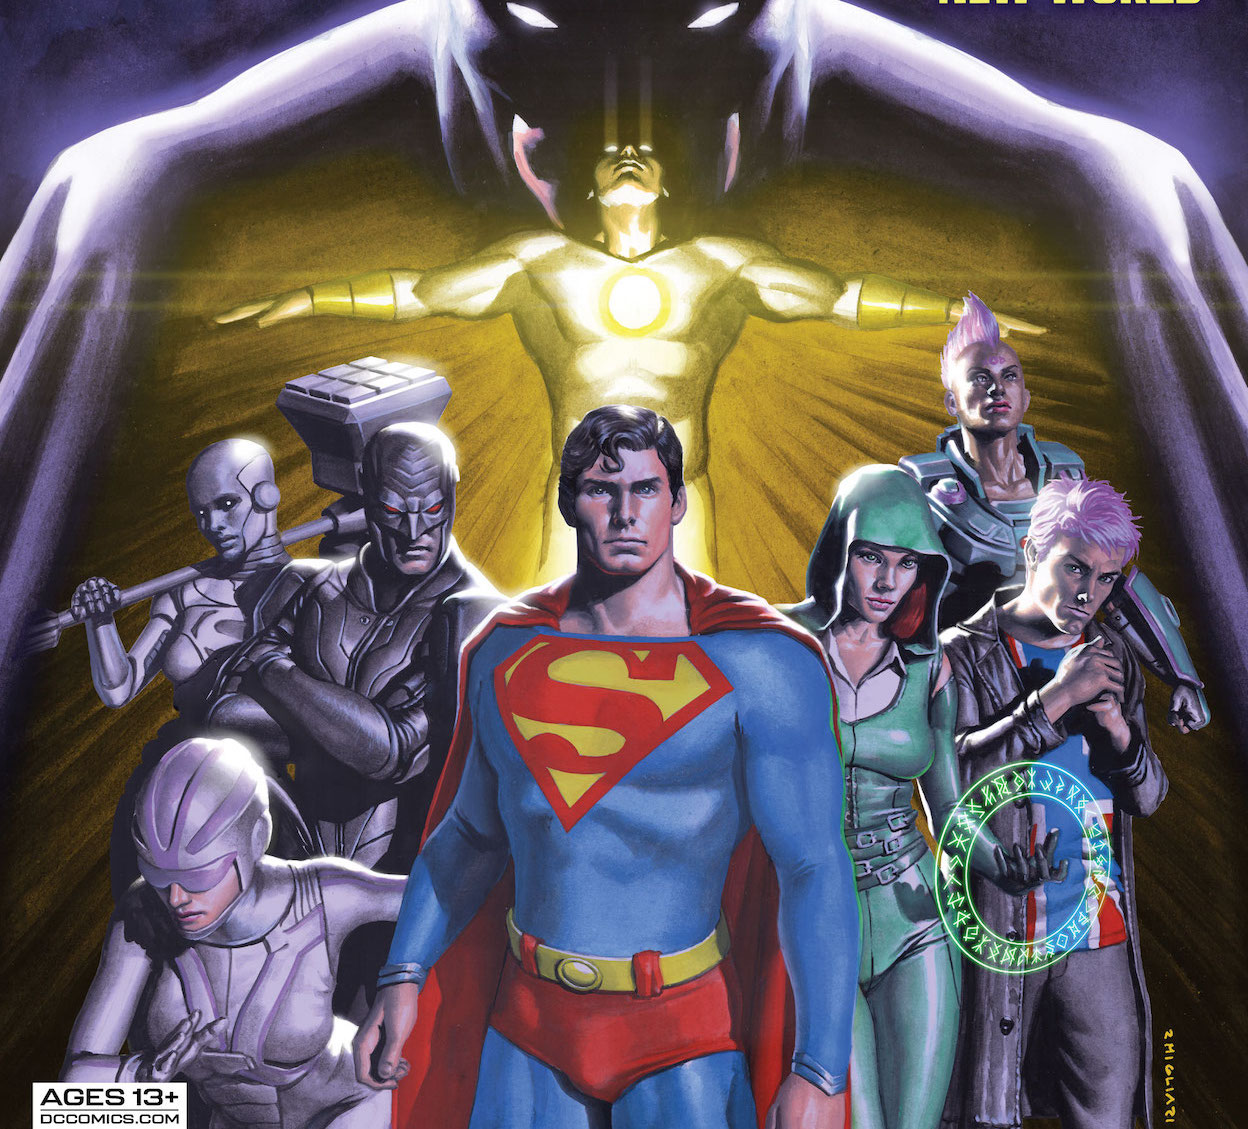 'Batman/Superman Authority Special' #1 is great high-stakes storytelling